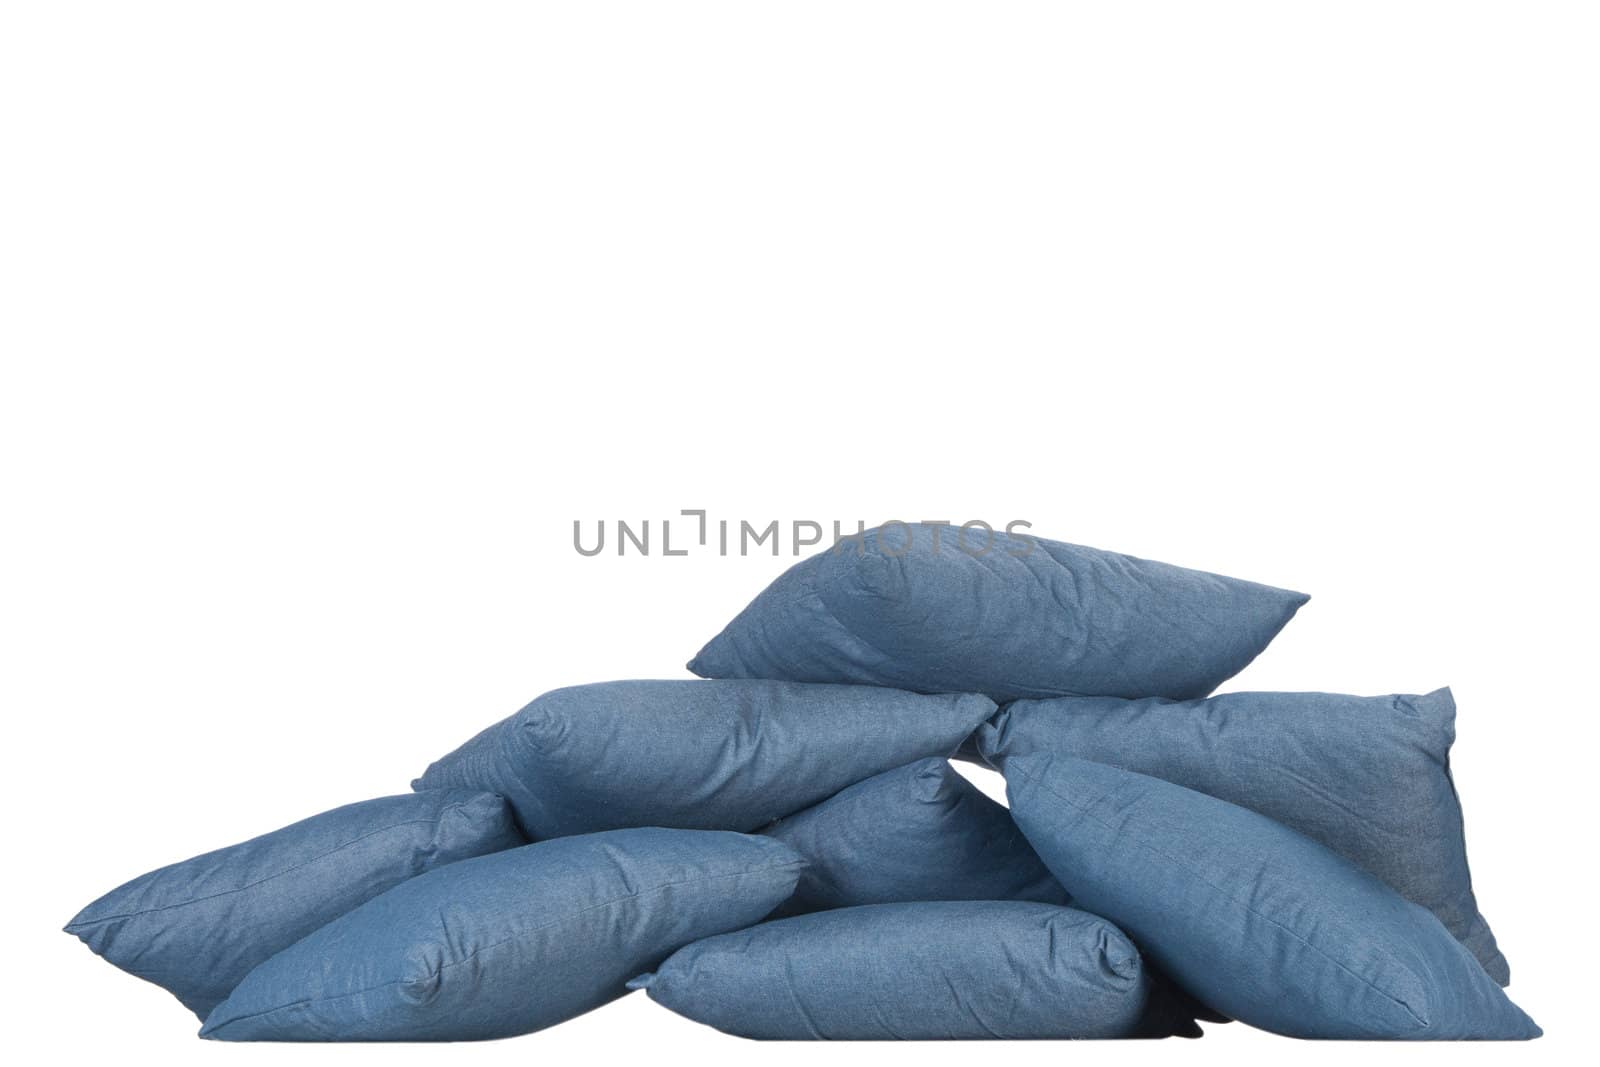 stack of blue denim pillows isolated on white